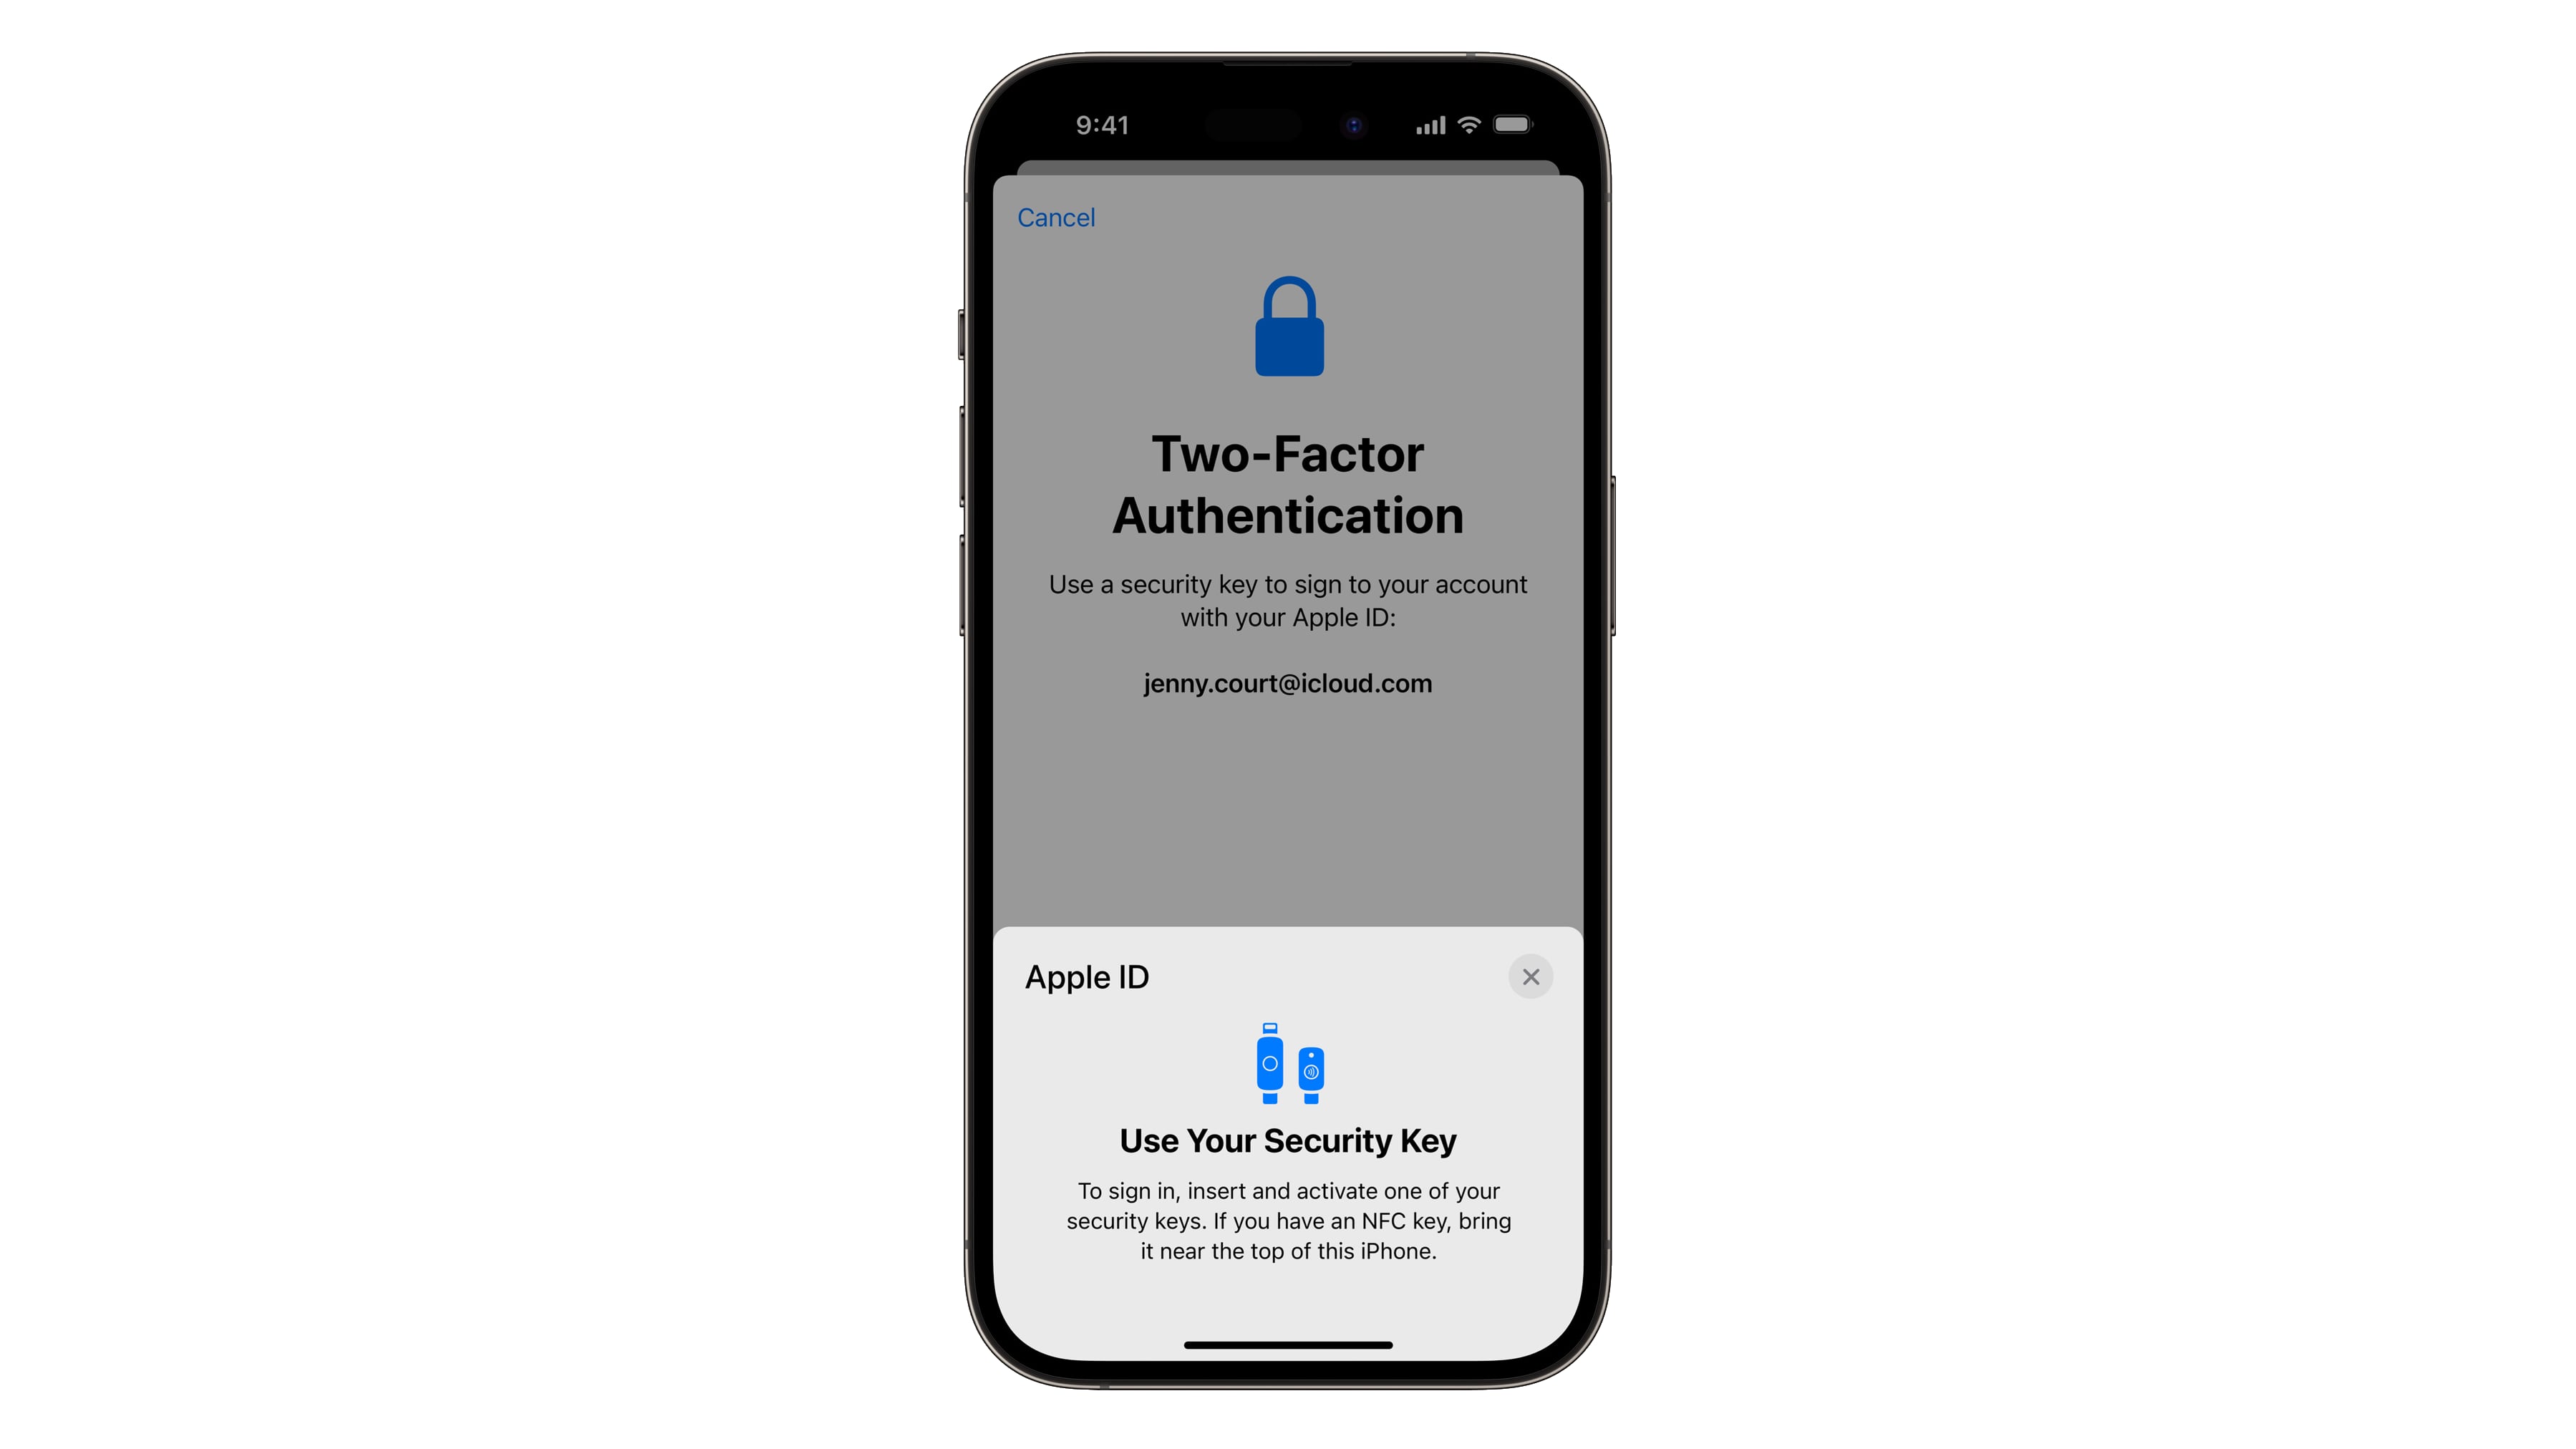 iPhone screenshot showcasing authenticating Apple ID access with a hardware security key